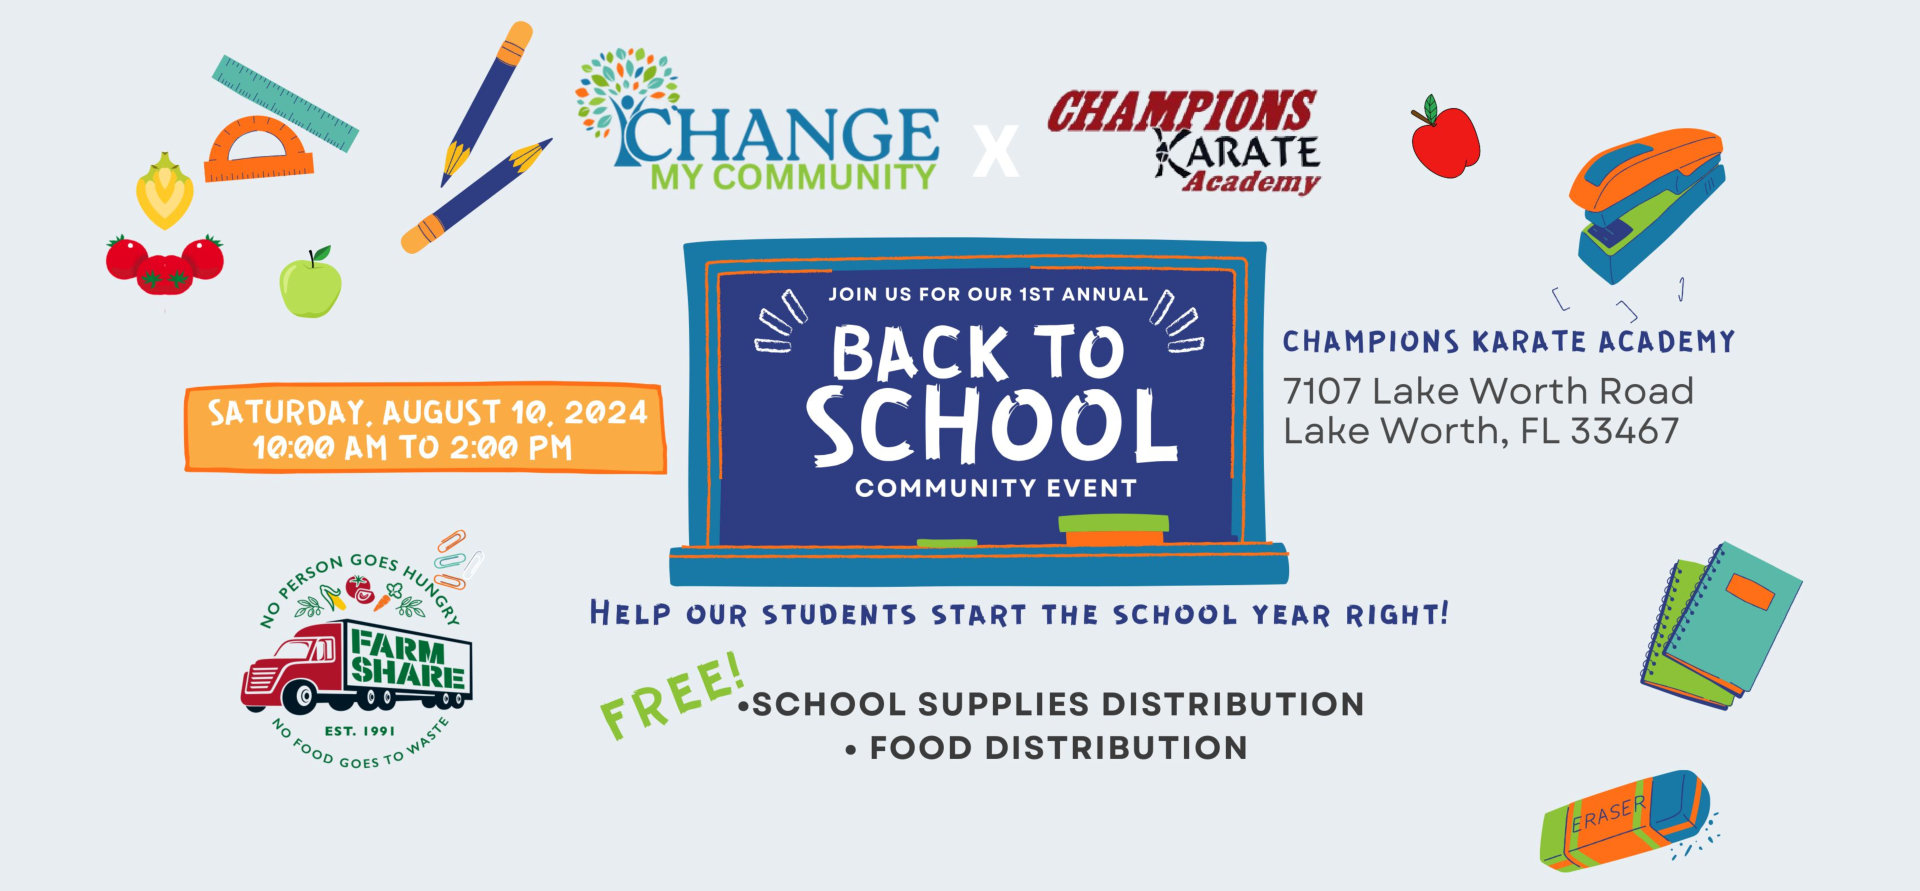 Back to school community with partnership with champions karate academy on saturday 